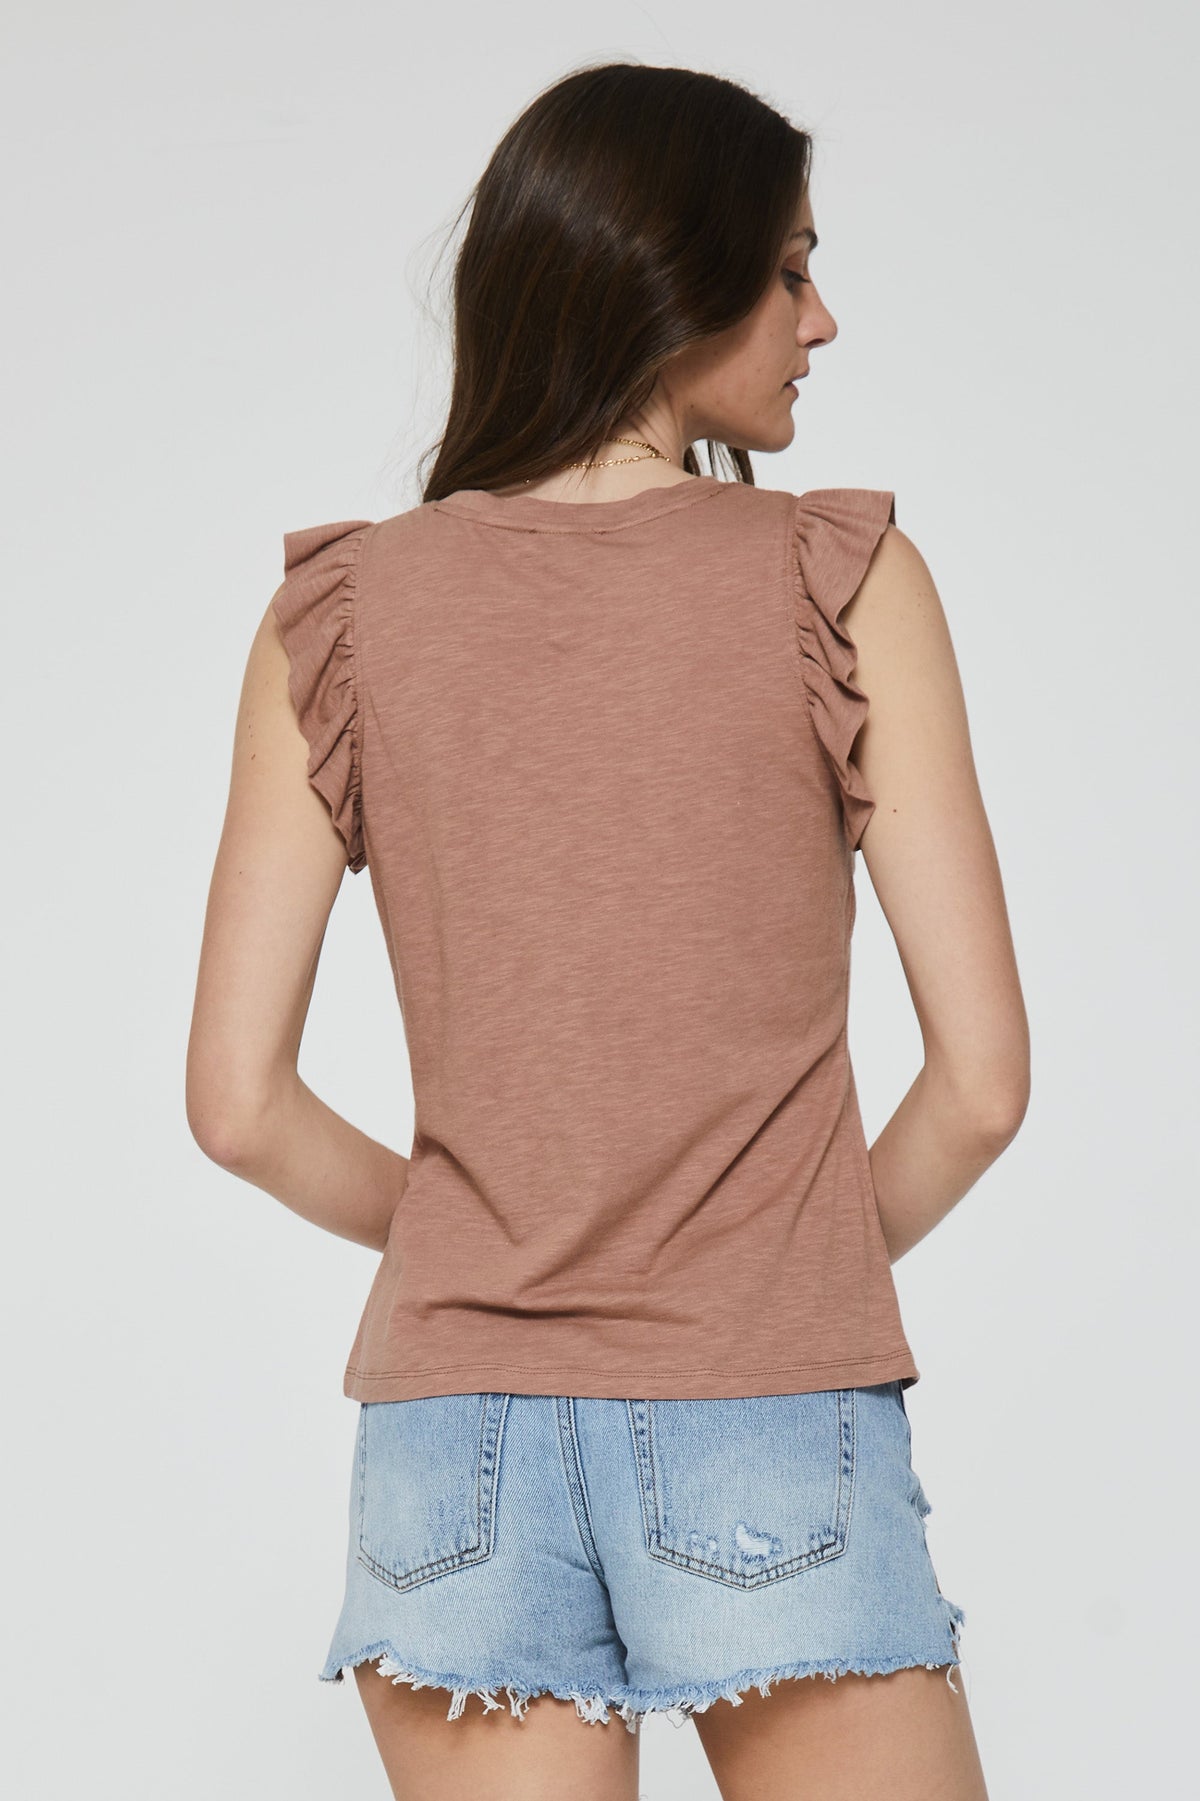 north-ruffle-trimmed-top-pink-clay-back-image-another-love-clothing